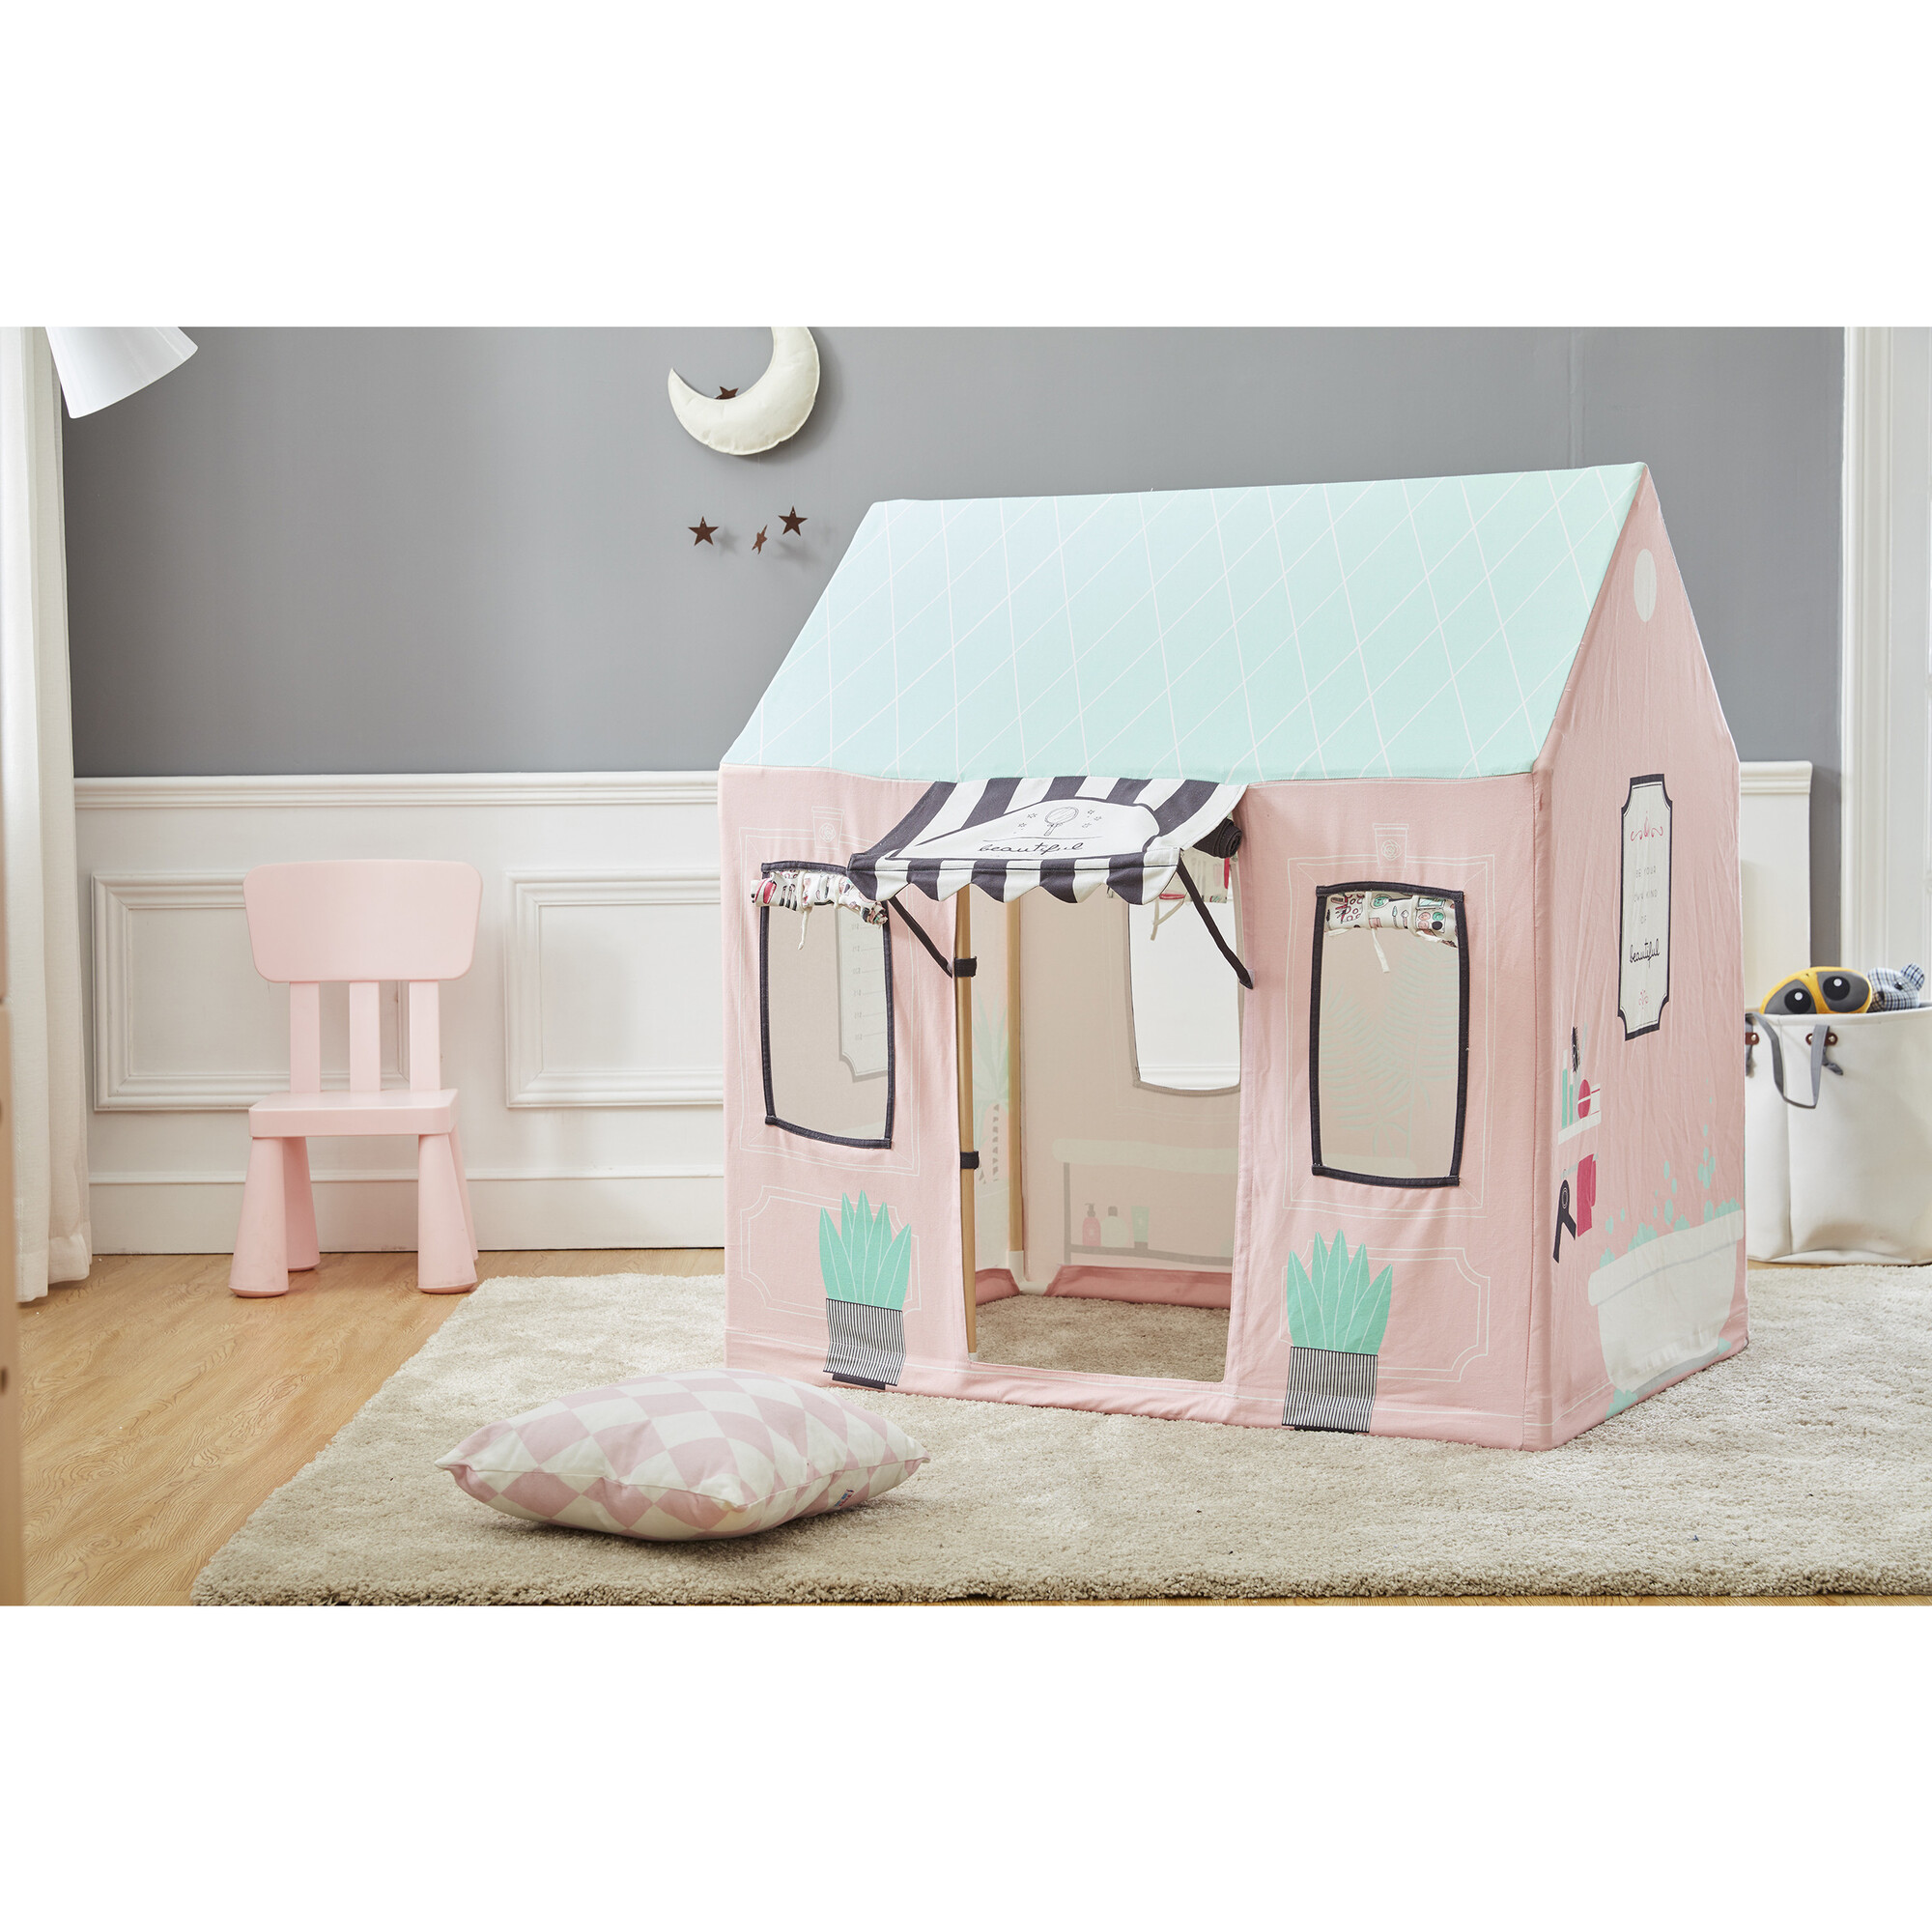 Beauty Salon Play Tent - Wonder & Wise by Asweets Pretend Play, Play Tents  & Vanities